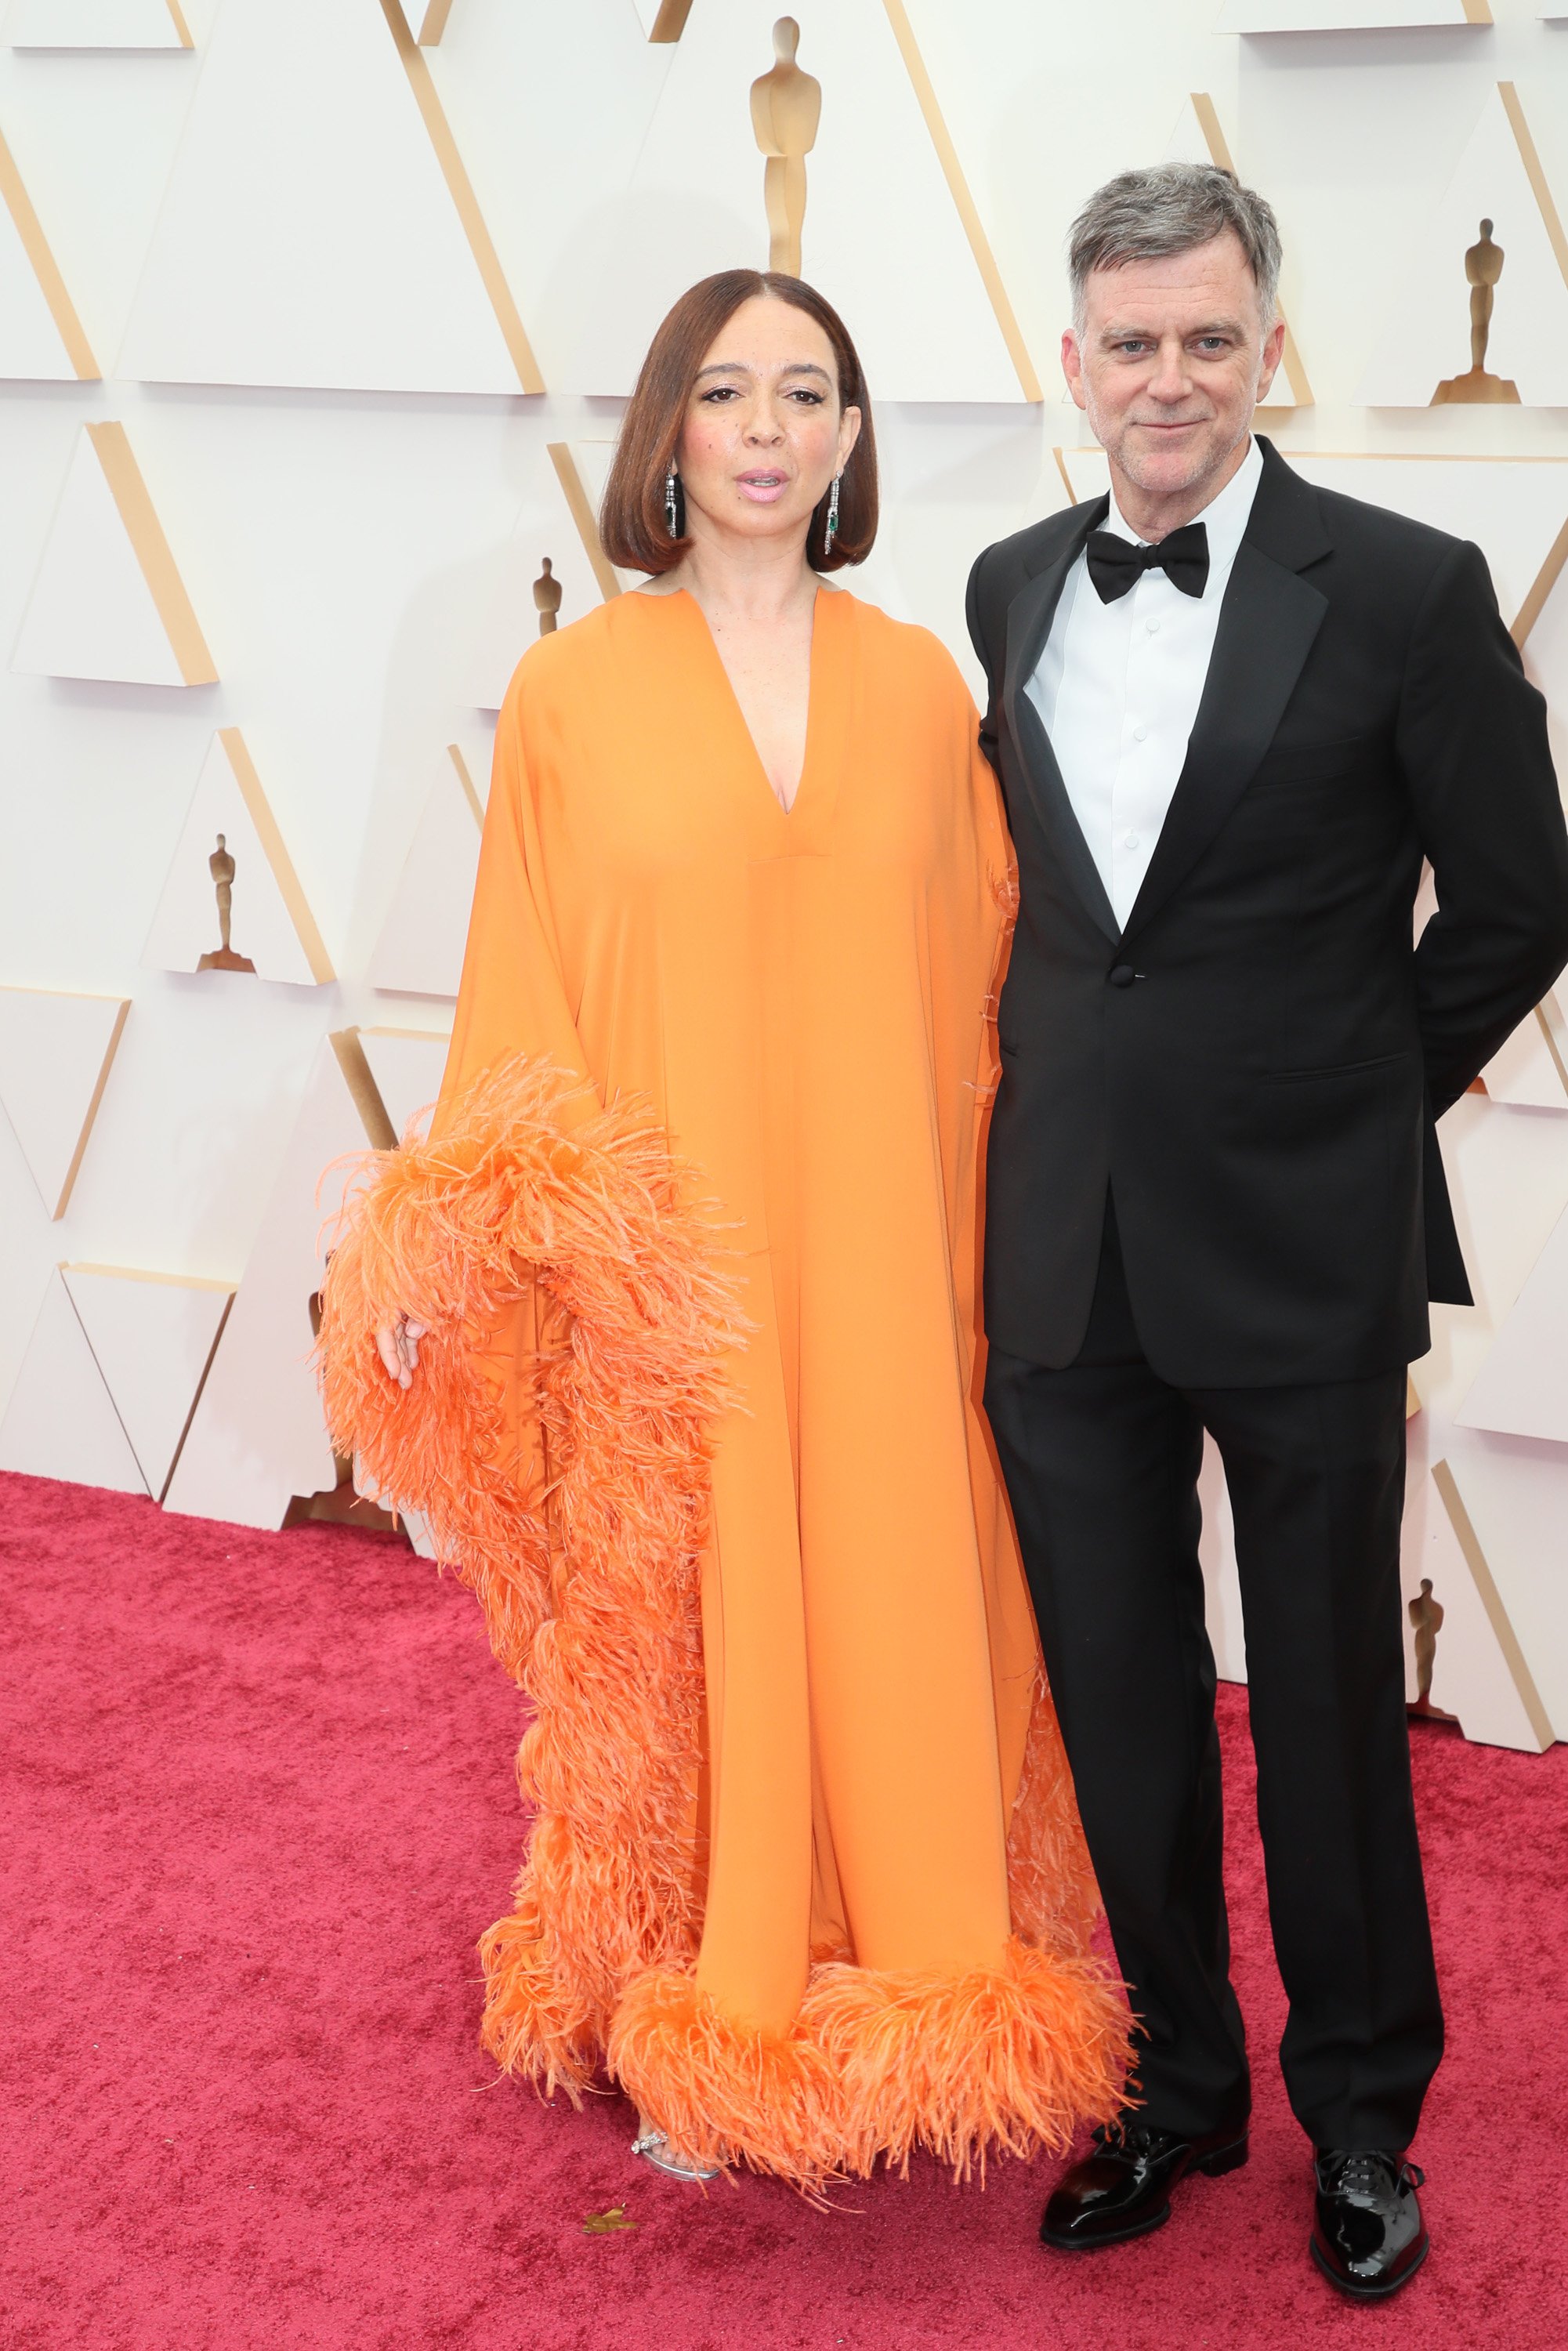 Maya Rudolph and Paul Thomas Anderson at the 94th Annual Academy Awards on March 27, 2022, in California | Source: Getty Images